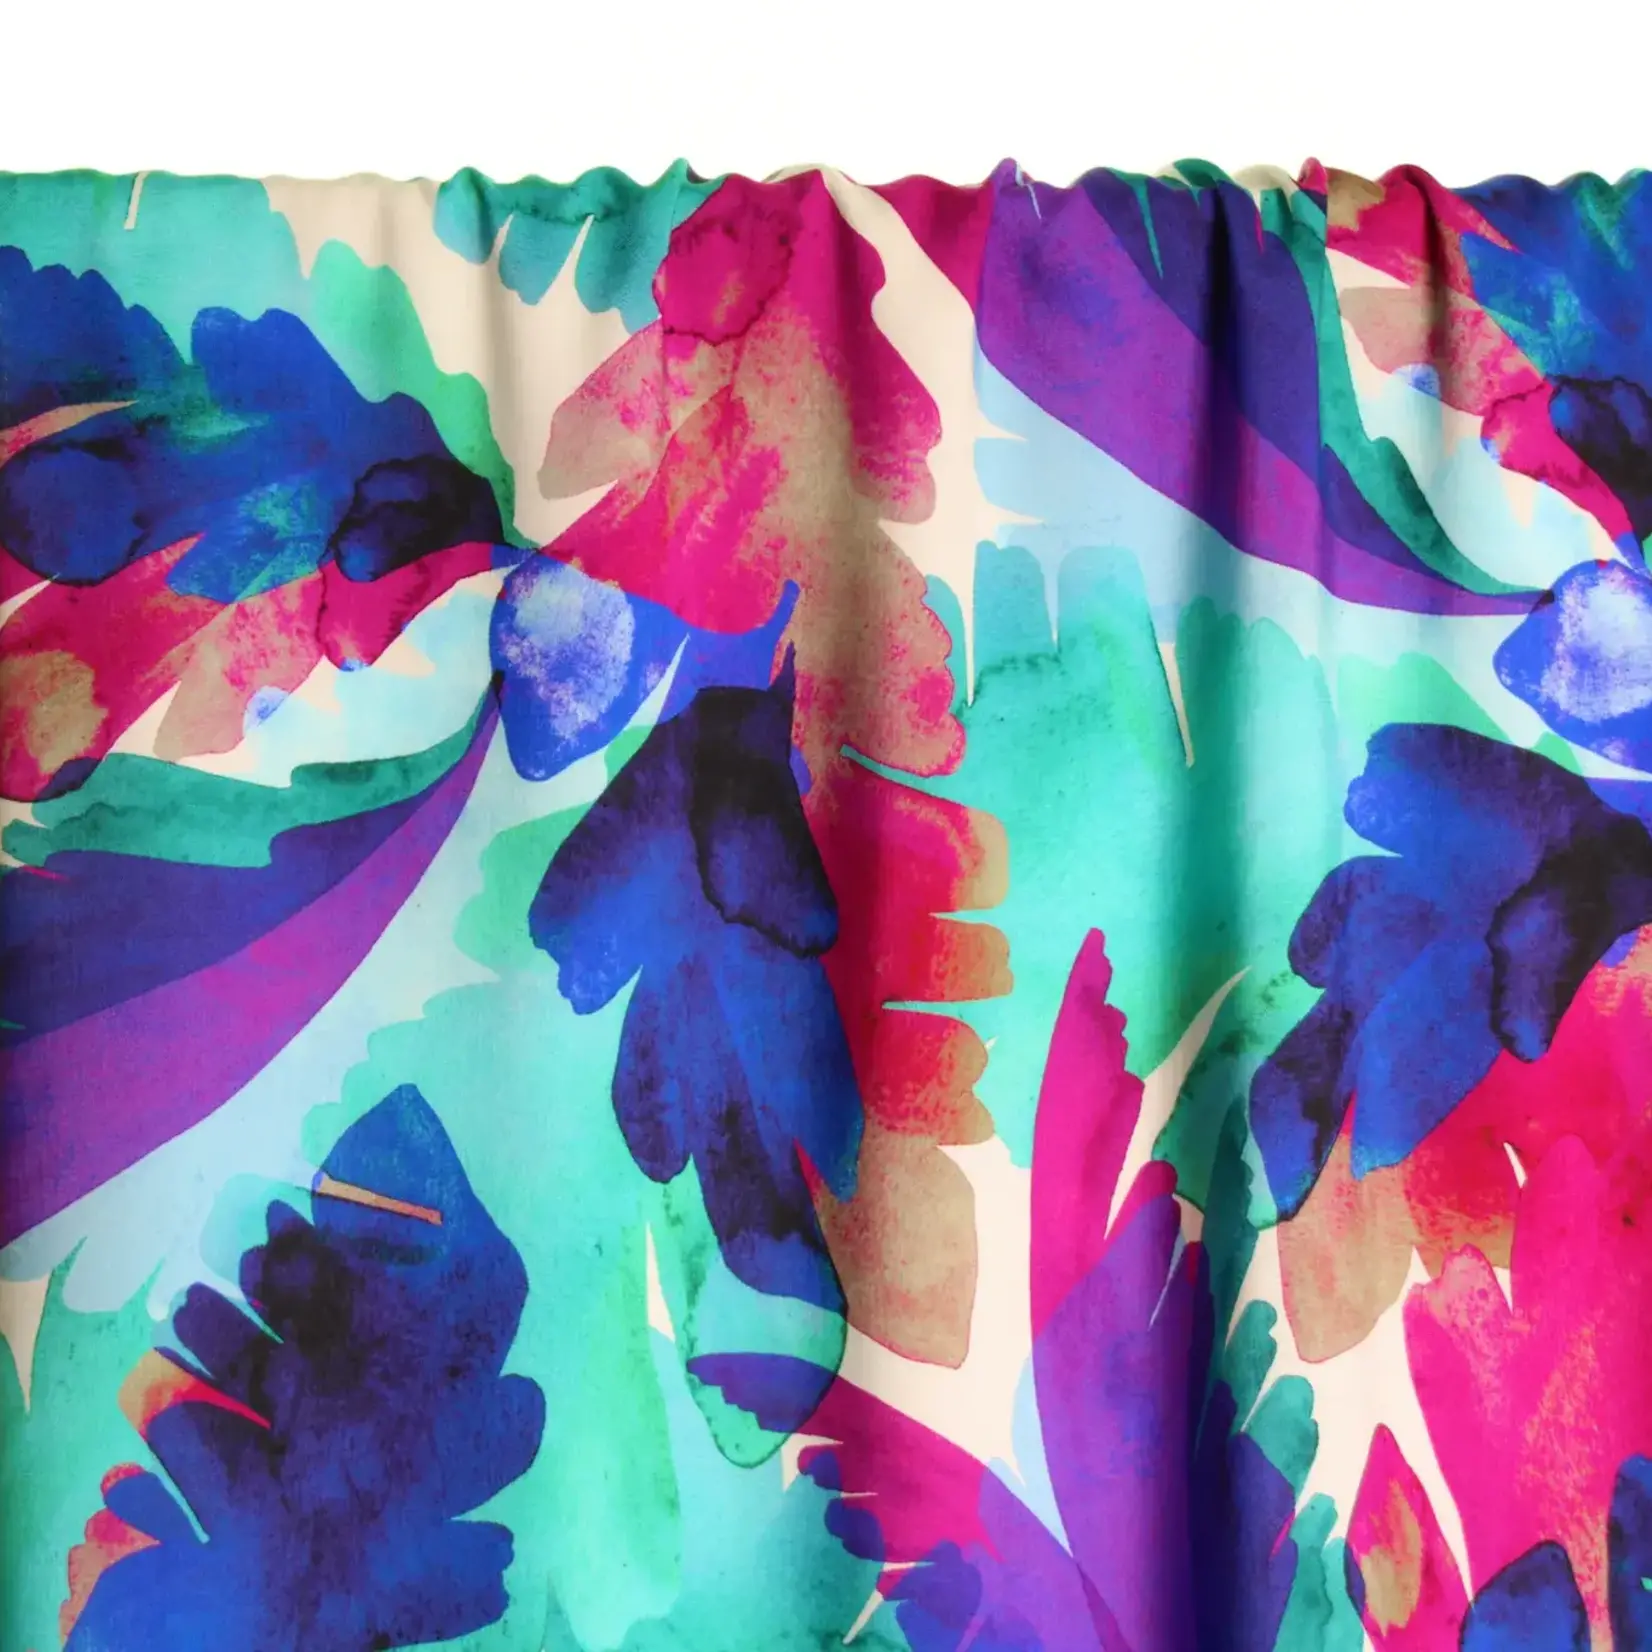 Atelier Jupe Bright and colourful viscose - Atelier Jupe